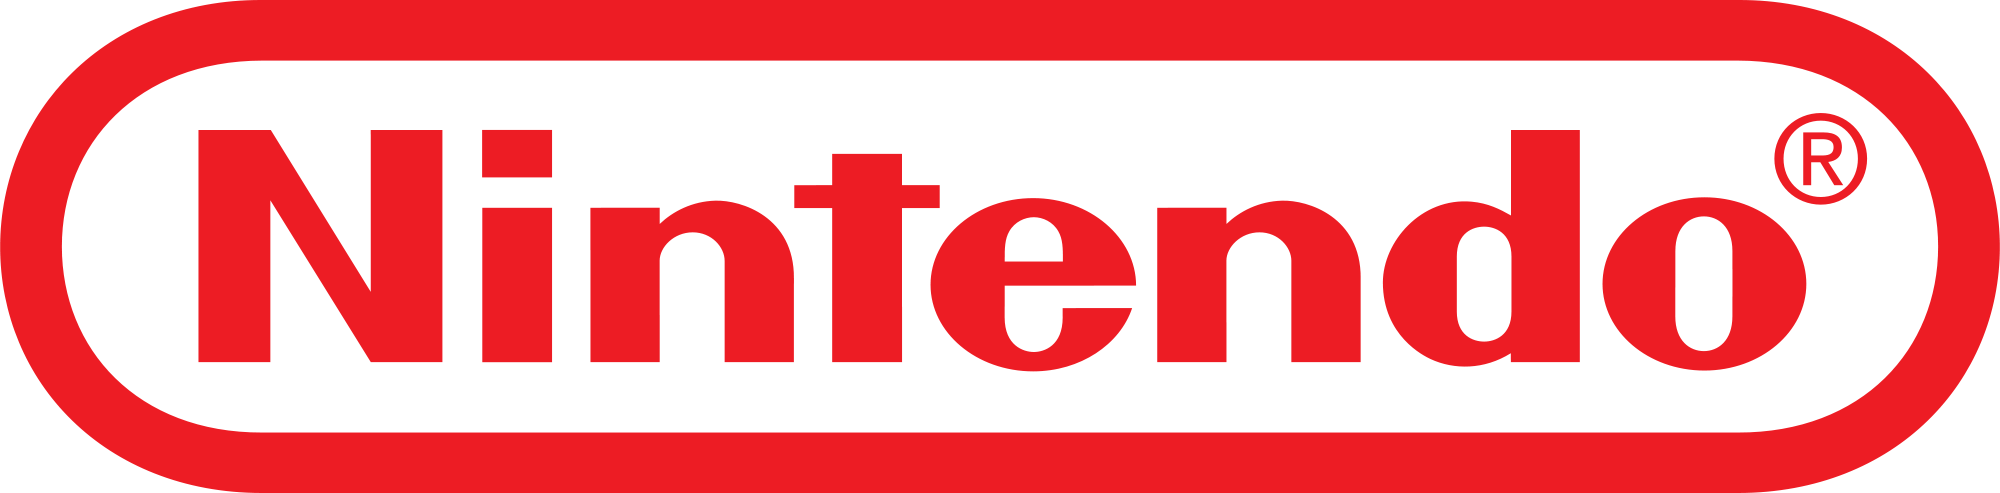 Picture of the Nintendo logo